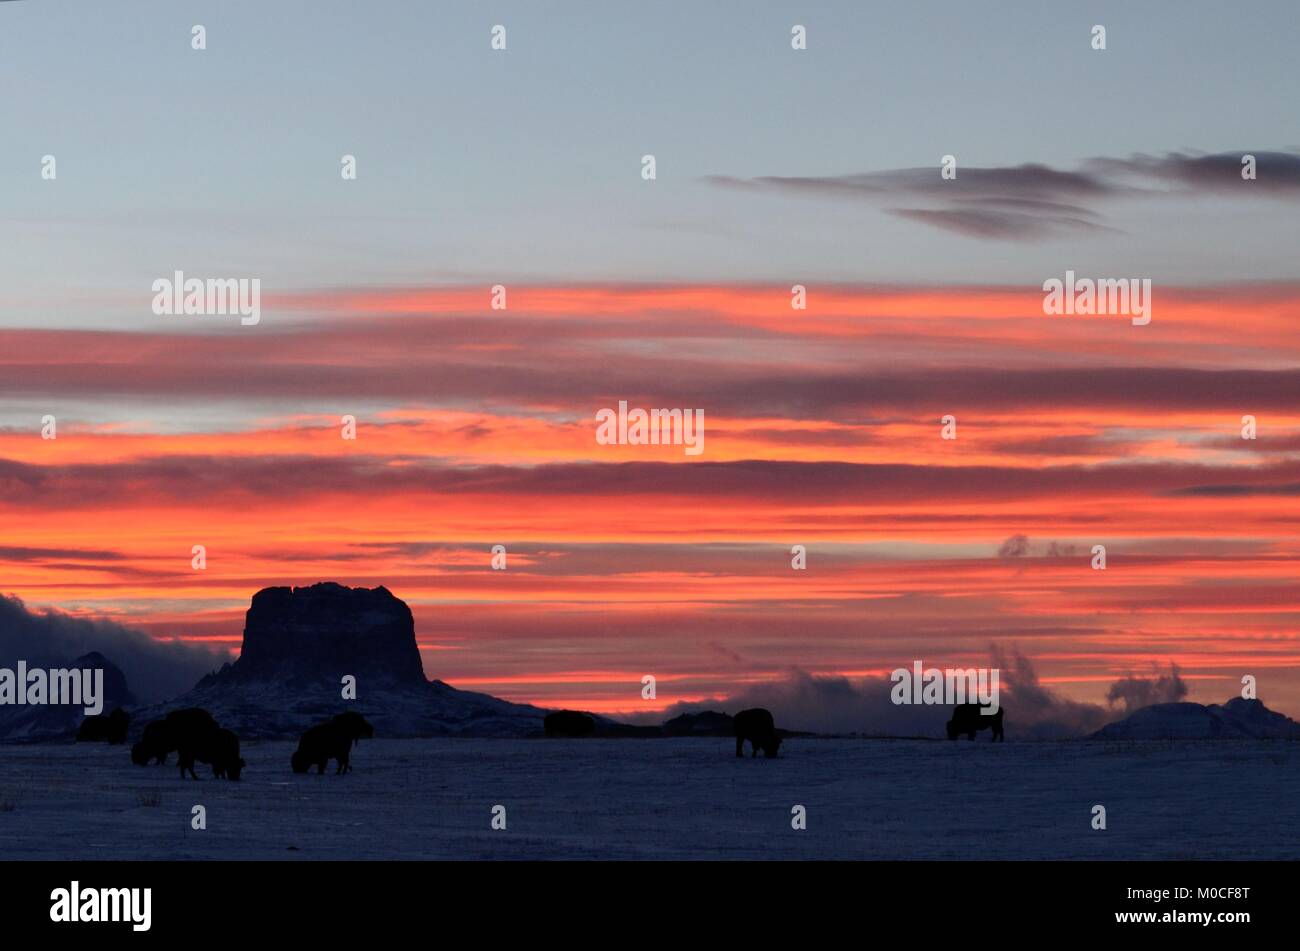 A herd of buffalo grazing in a field with an amazing sunset over looking Chief mountain Stock Photo